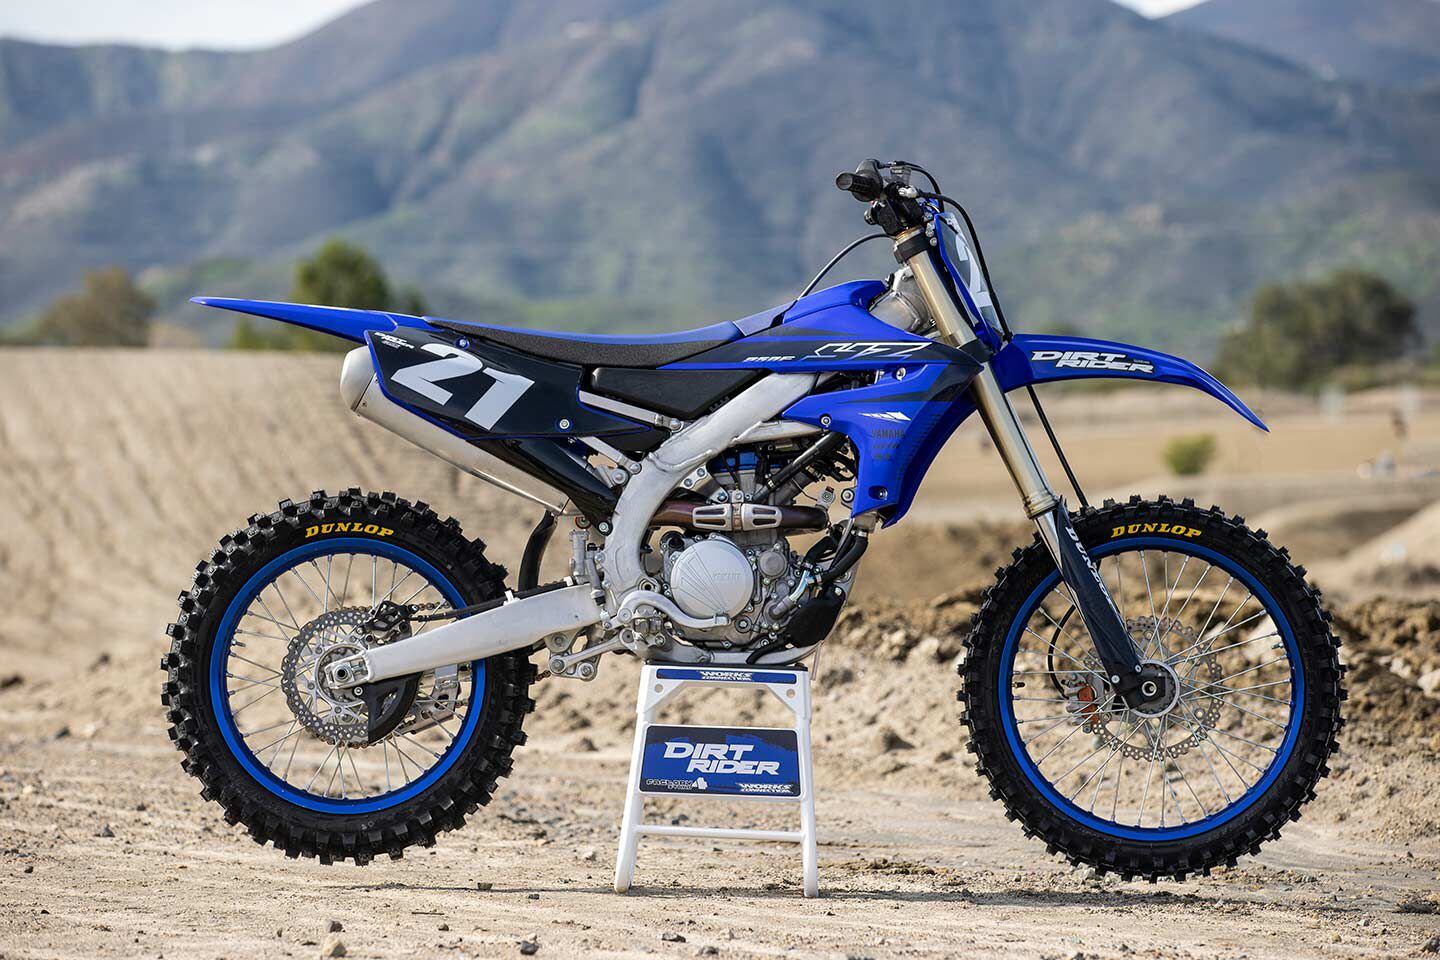 Blu cRU left well enough alone with its quarter-liter four-stroke motocrosser in 2023. Mechanically unchanged, it weighs the same as last year—235 pounds wet on the <i>Dirt Rider</i> scales.